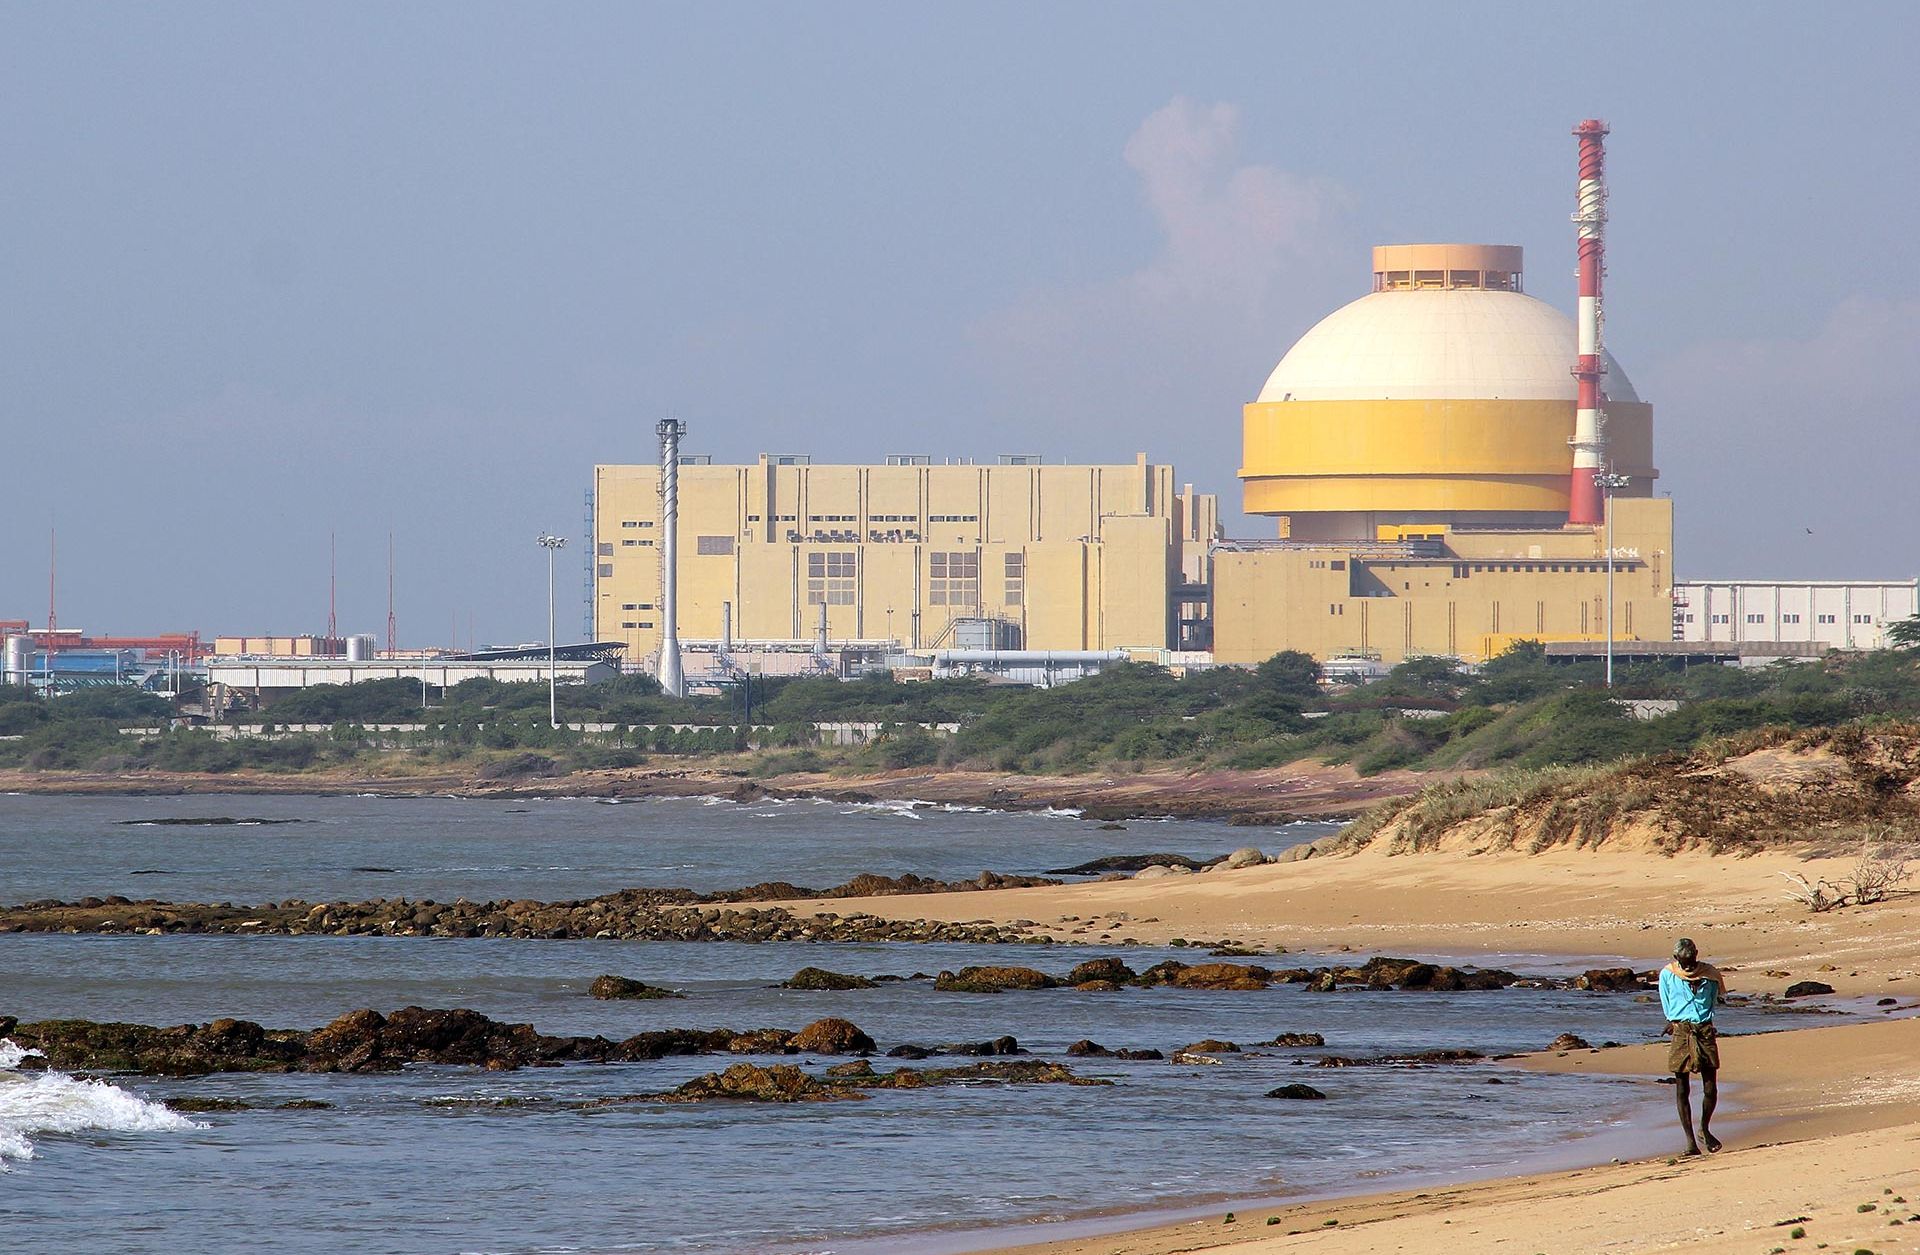 Russia's increasing involvement in India's nuclear power program includes Rosatom's building of two reactors at the Kudankulam Nuclear Power Plant.